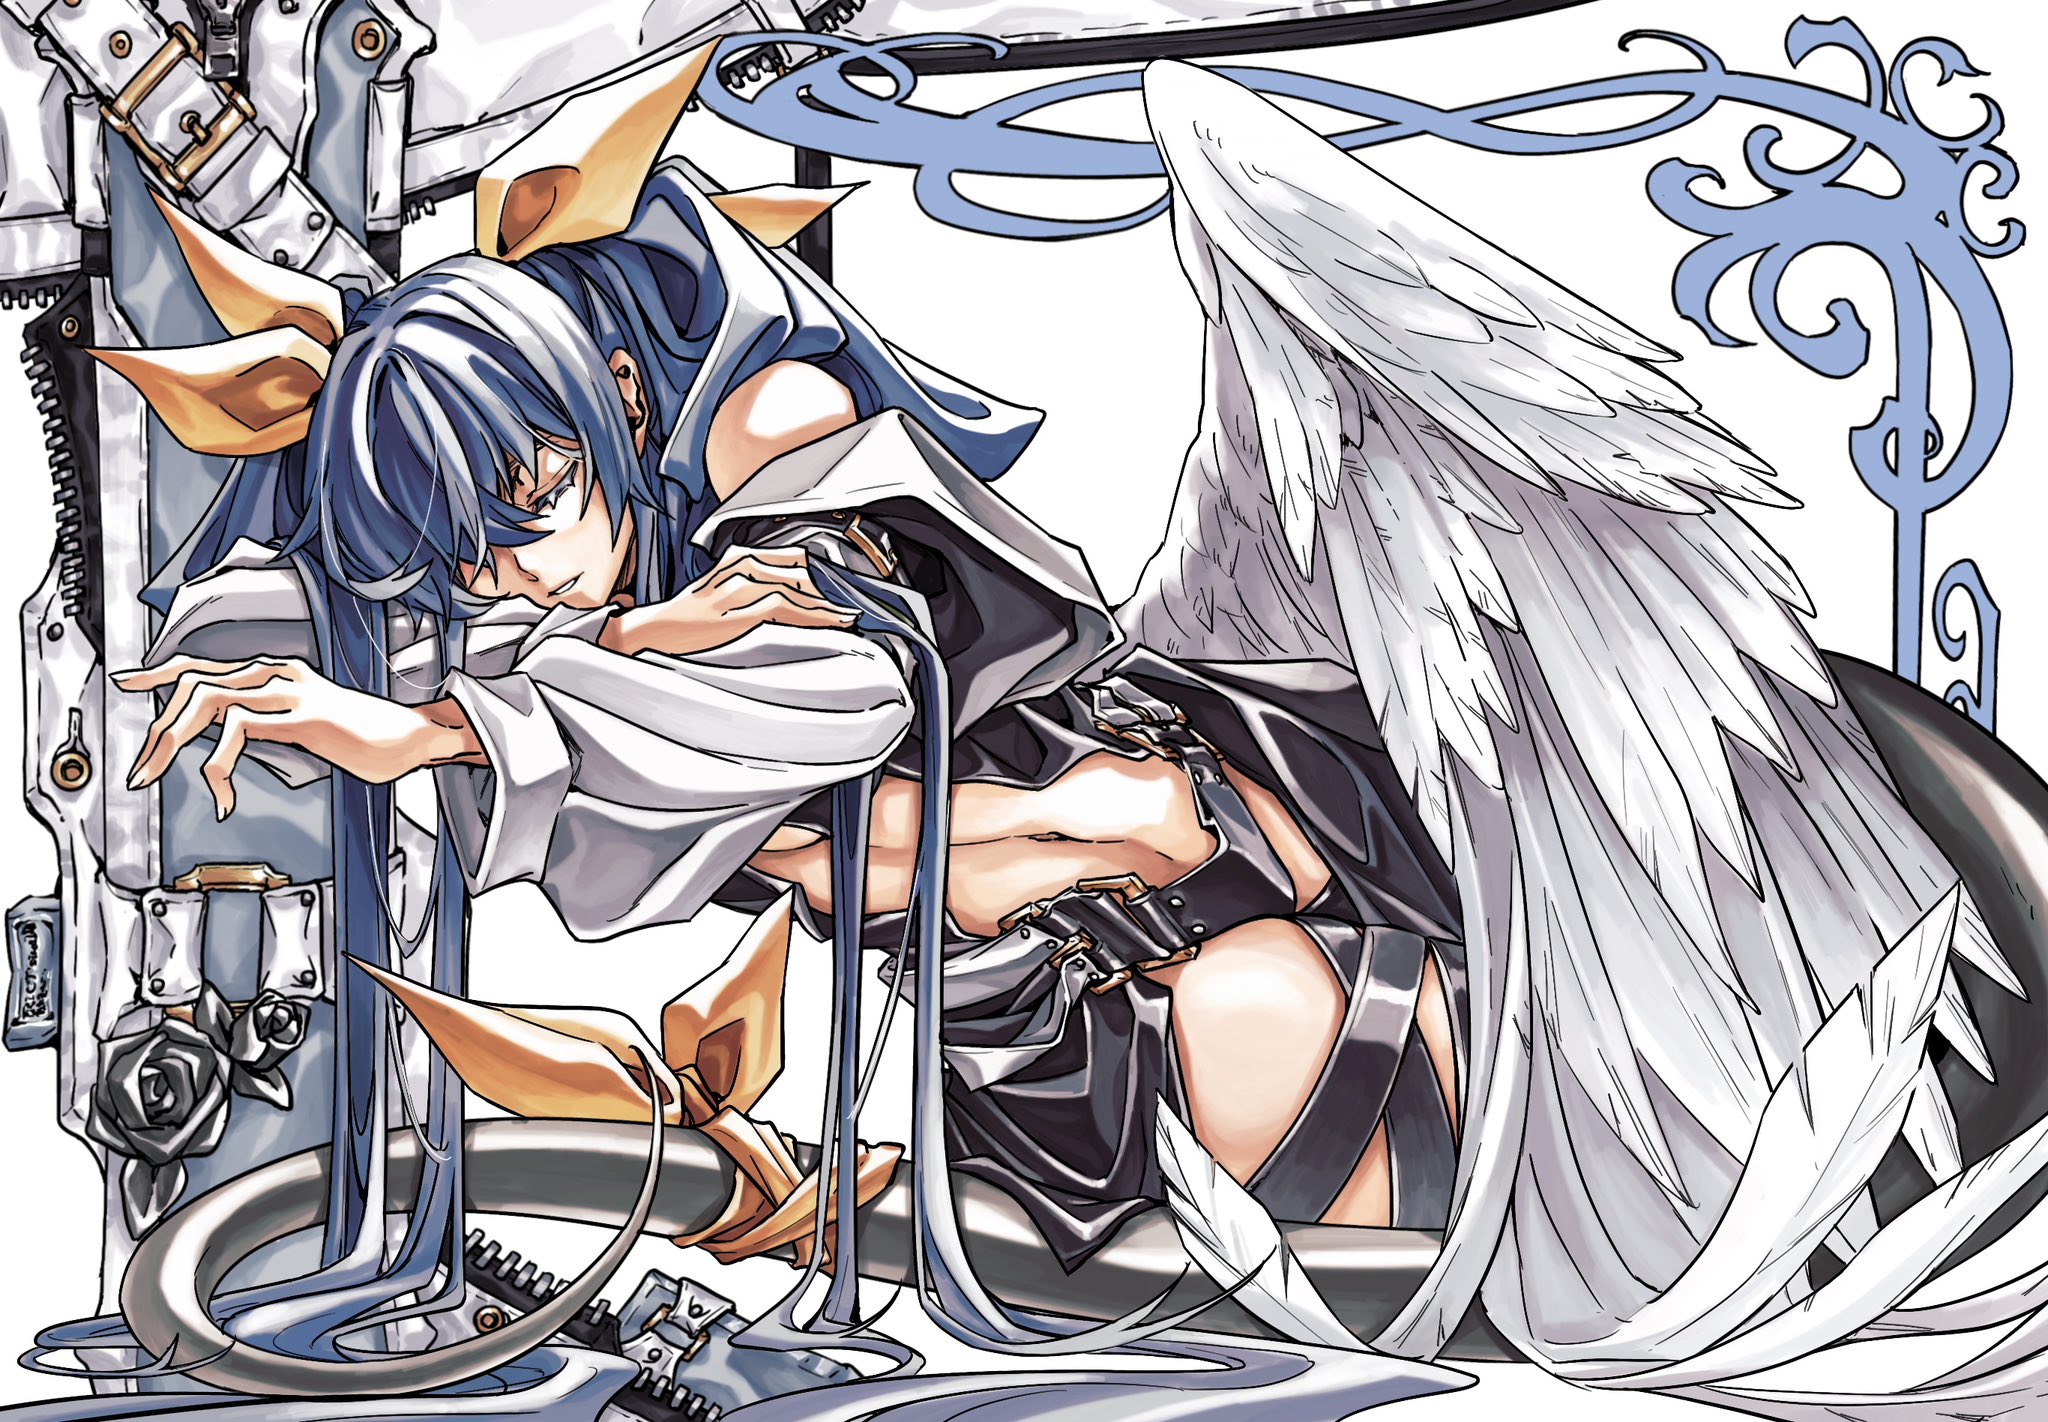 Anime 2048x1422 Guilty Gear Dizzy (Guilty Gear) anime girls anime girl with wings fighting games